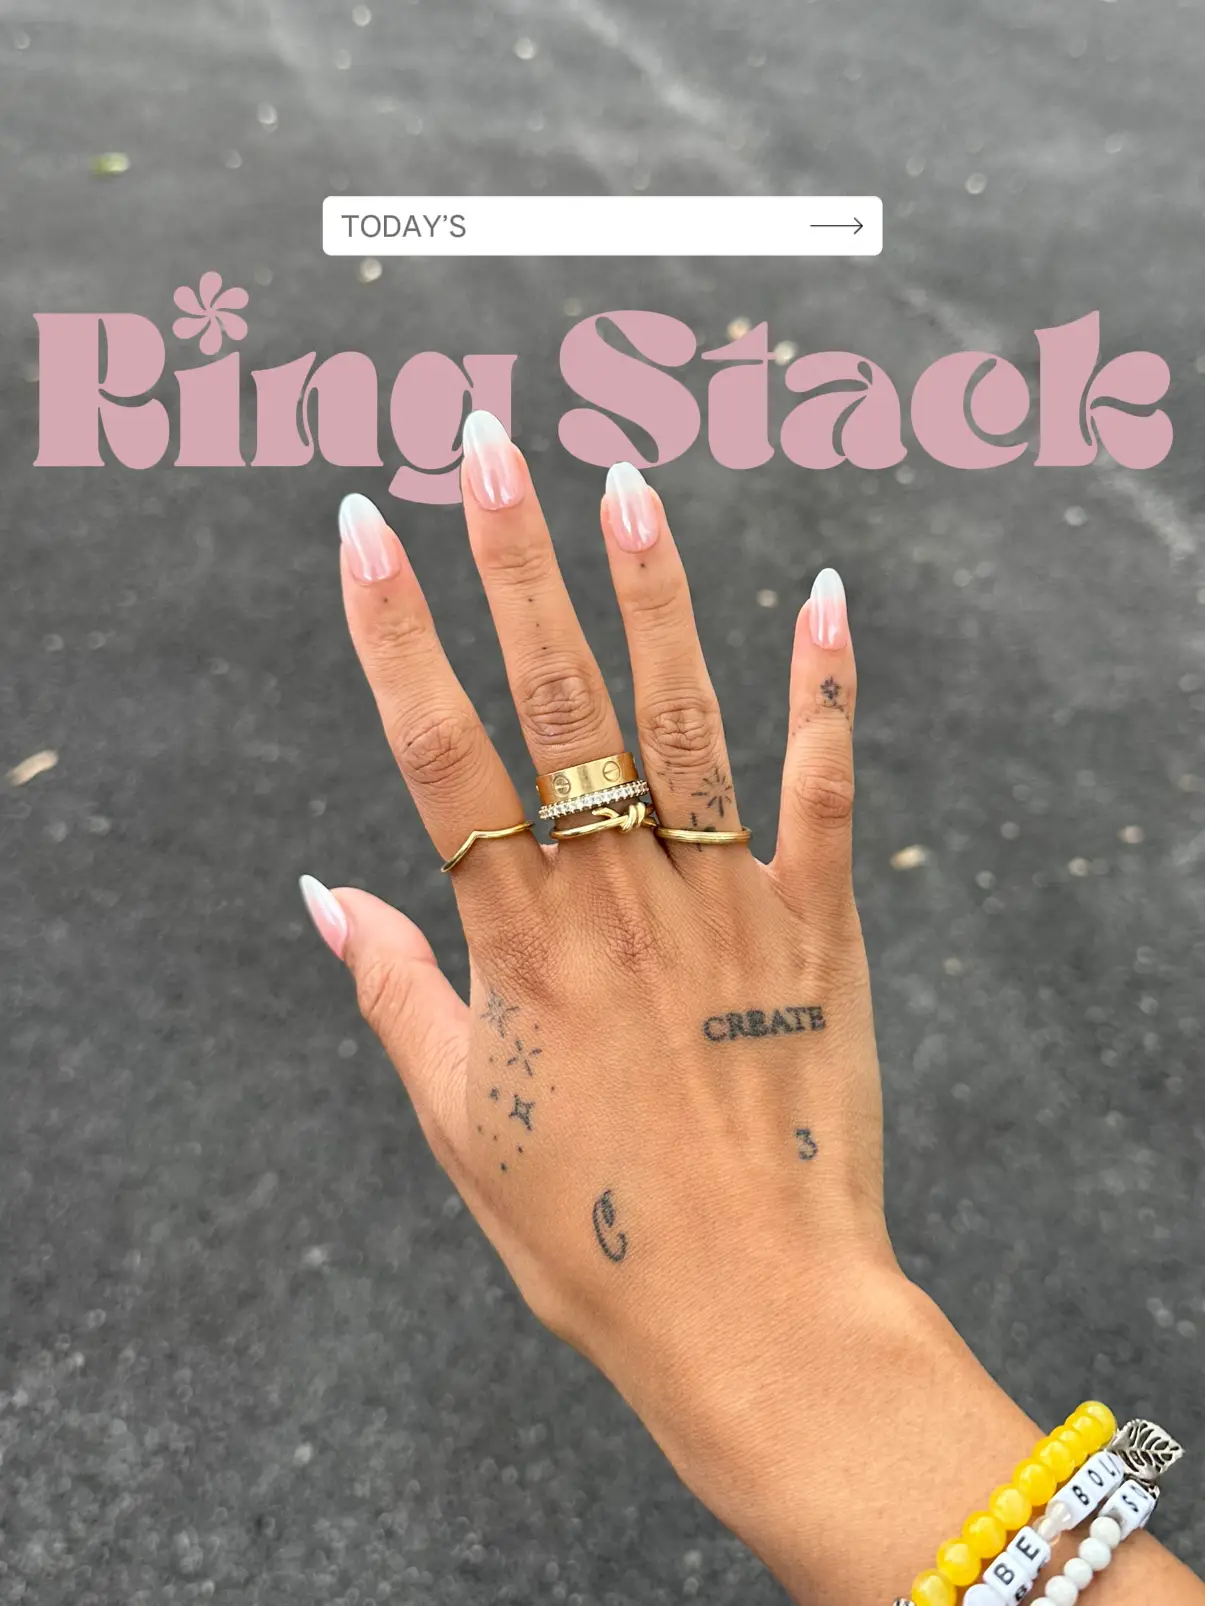 Female ring stacking! I am going to buy the Oura ring but currently  deciding how to go about wearing it. Please comment with photos of how you  stack your oura ring/ make